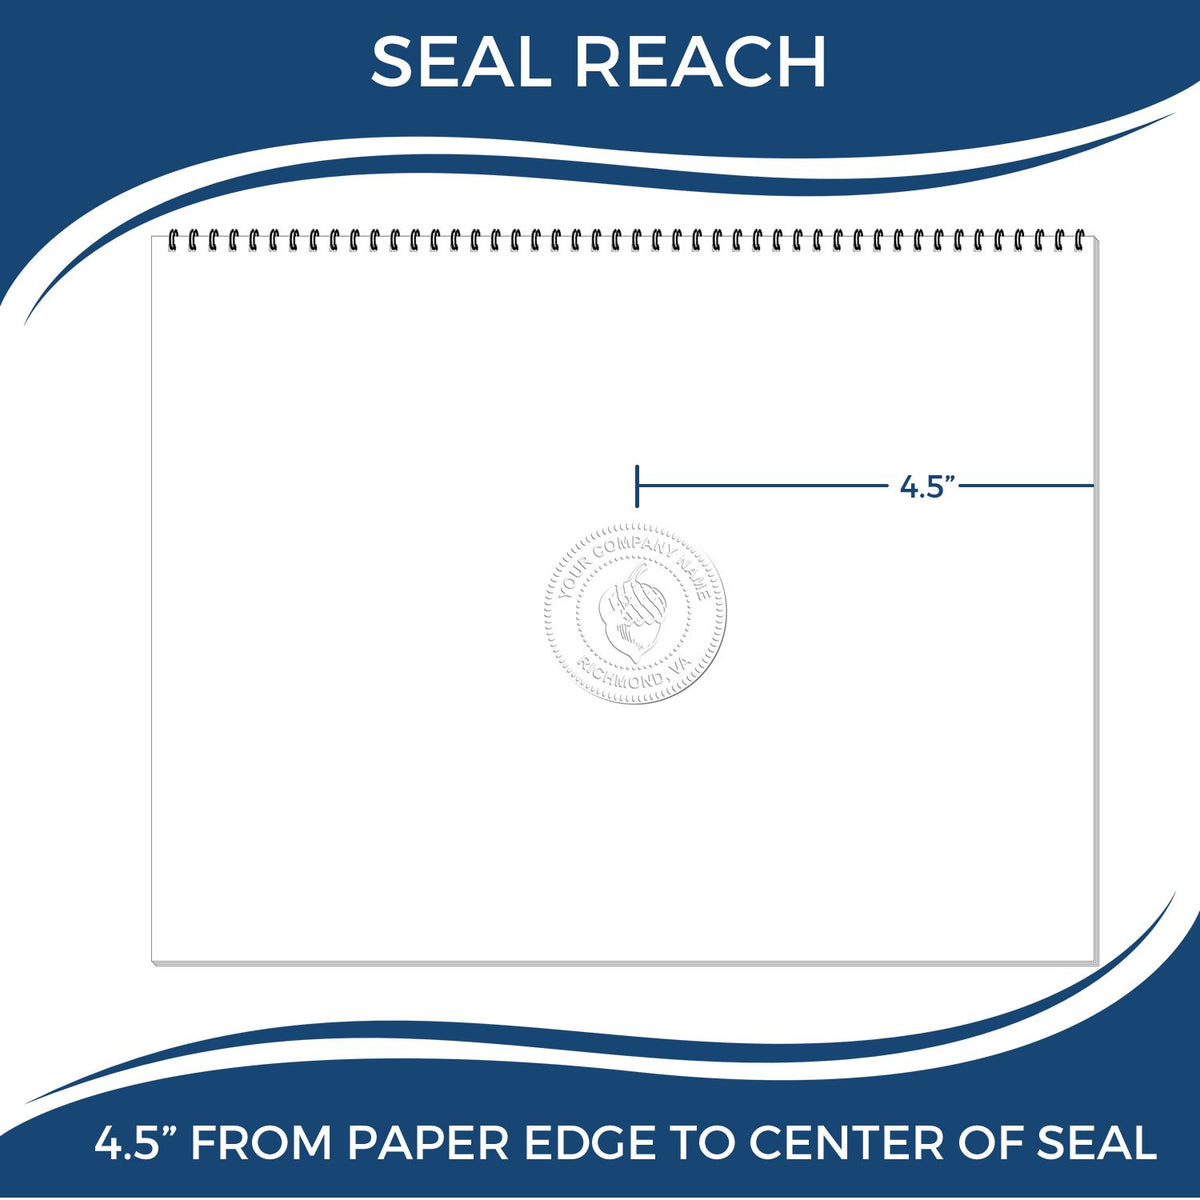 An infographic showing the seal reach which is represented by a ruler and a miniature seal image of the State of Guam Extended Long Reach Geologist Seal